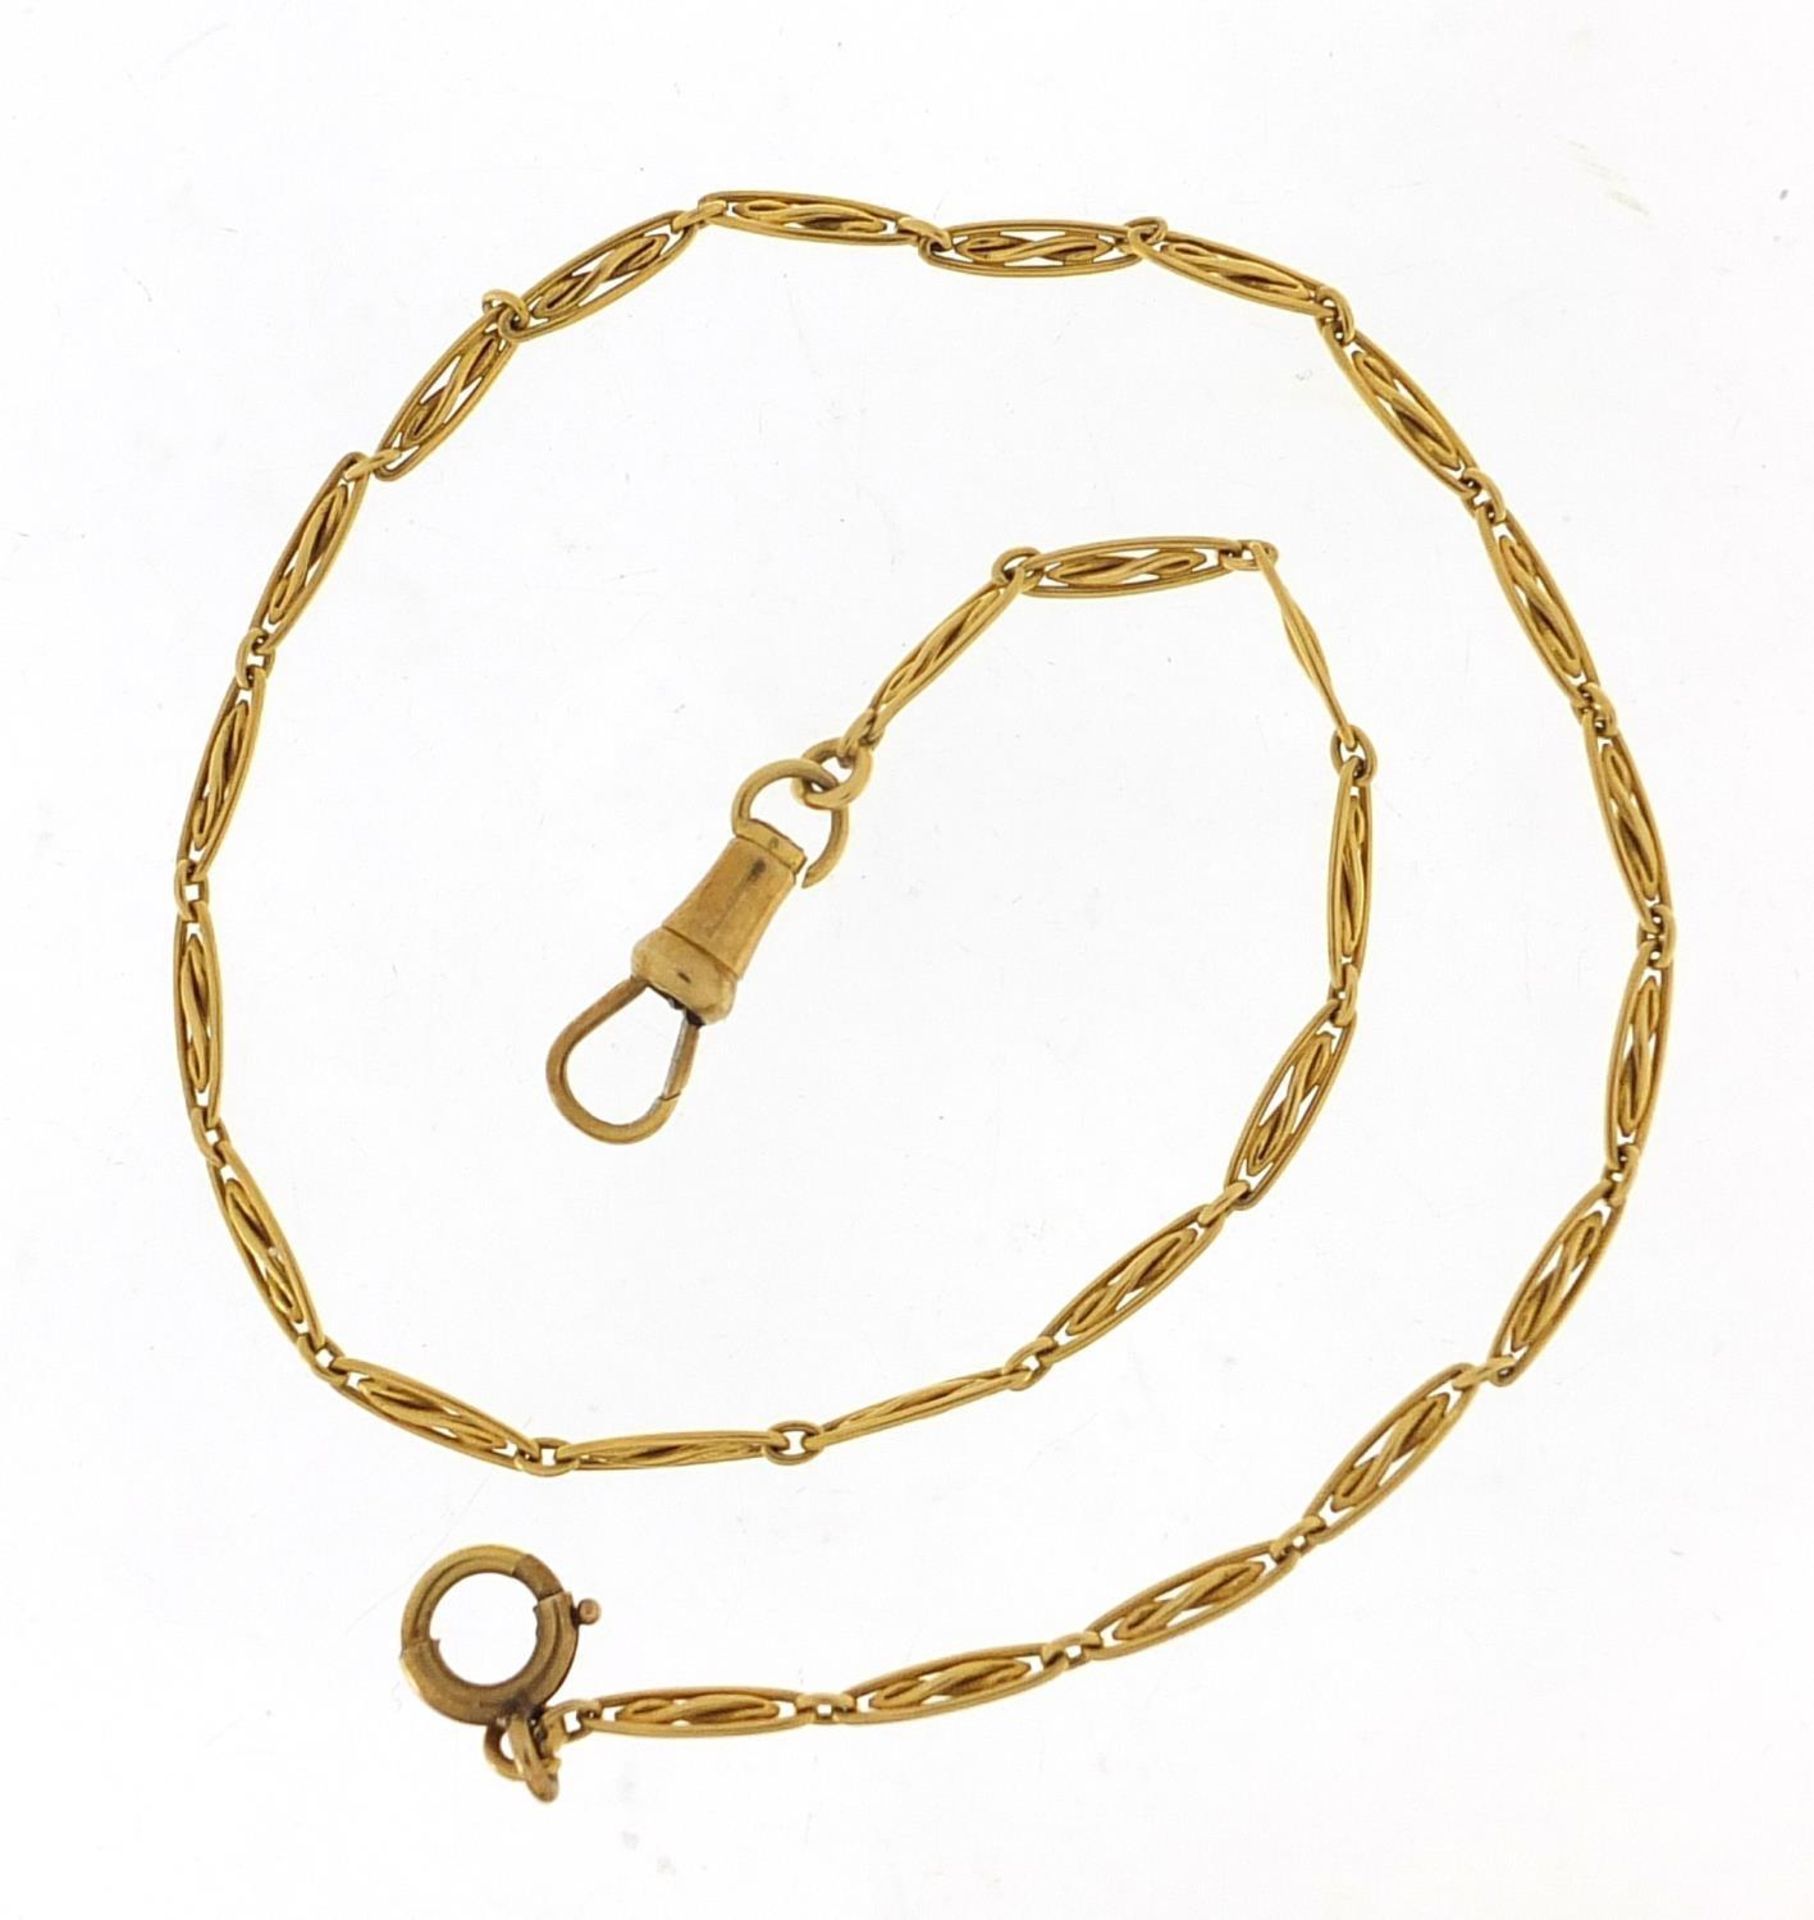 Continental 18ct gold necklace, 36cm in length, 10.2g